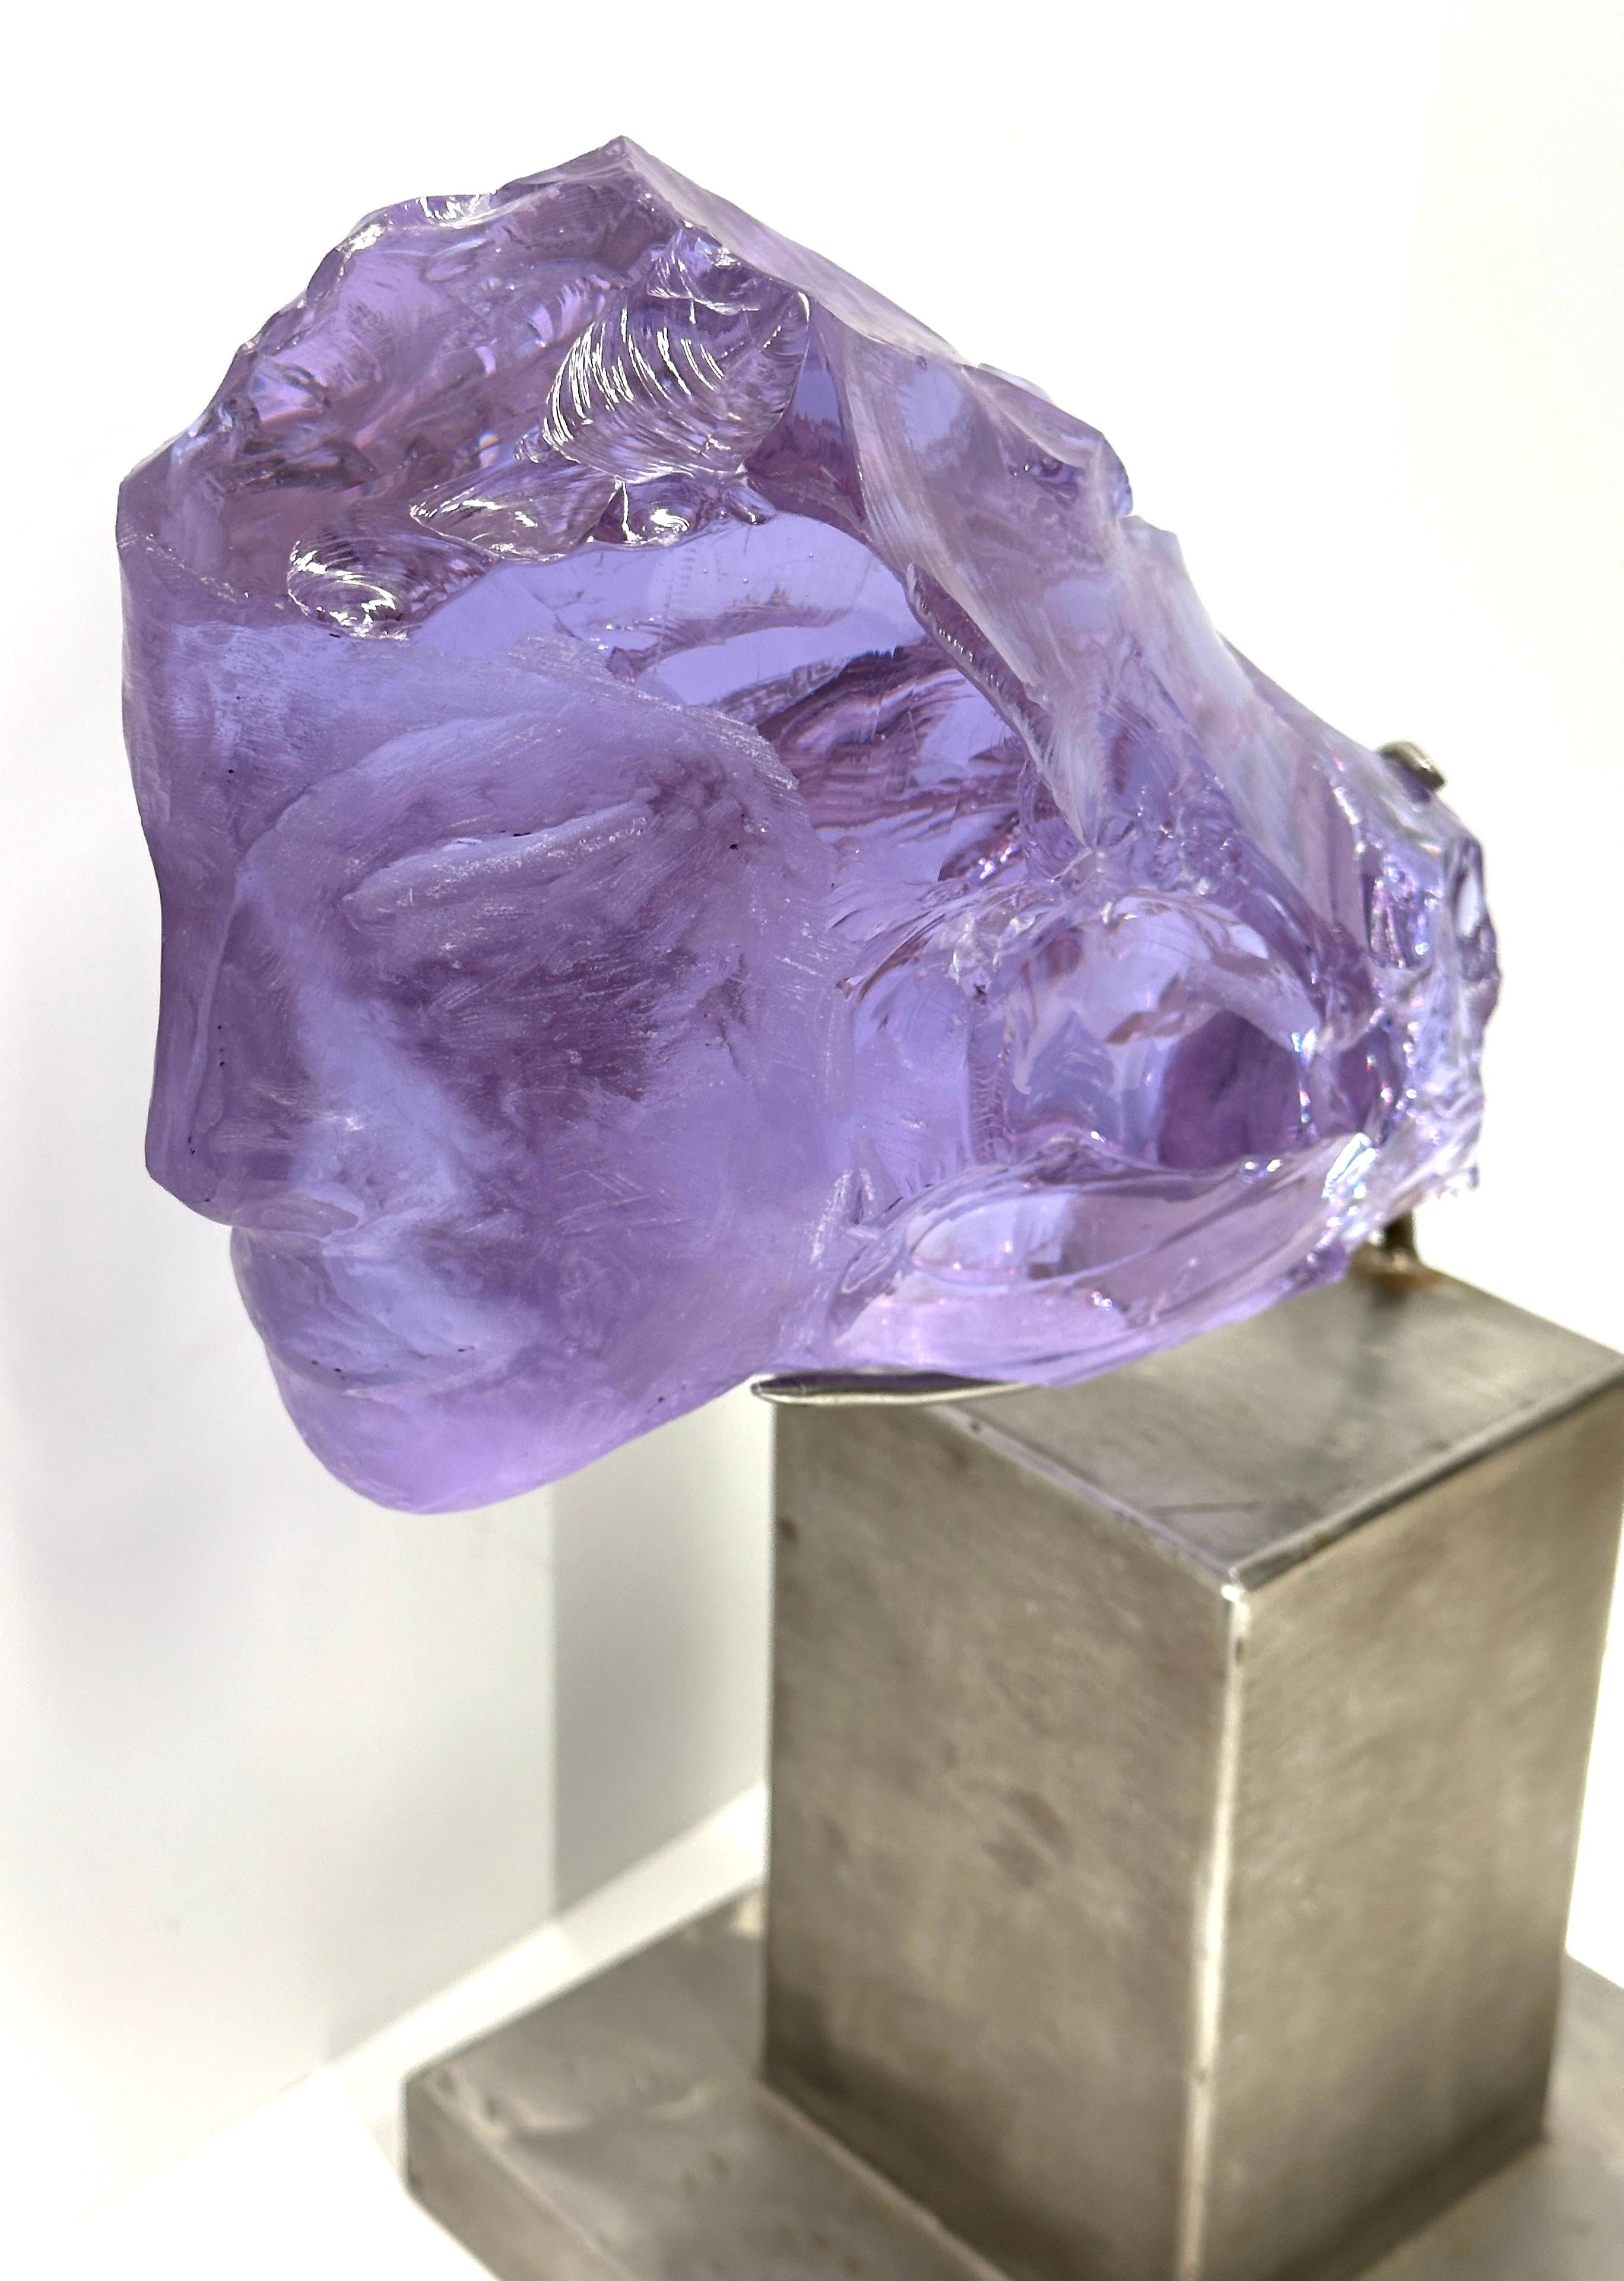 A stunning purple slag glass sculpture by the noted artist Suzanne Regan Pascal. It is mounted on a steel base and measures over 15 inches in height. The artist is in many important private collections, and her technique in carving slag glass was a